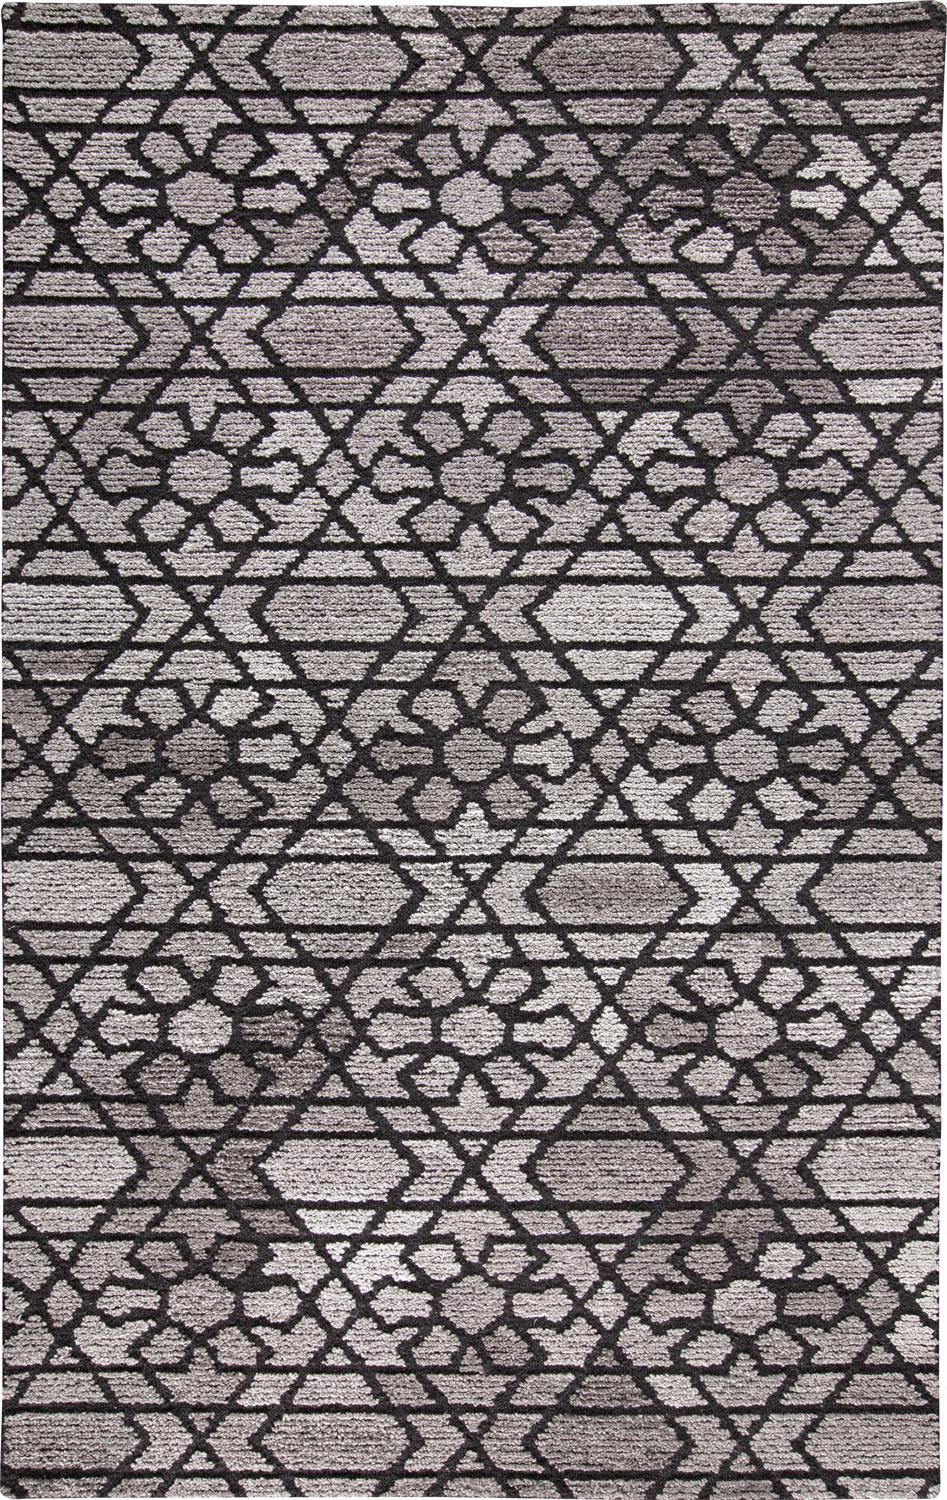 10' X 14' Taupe Black And Gray Wool Paisley Tufted Handmade Area Rug-512008-1